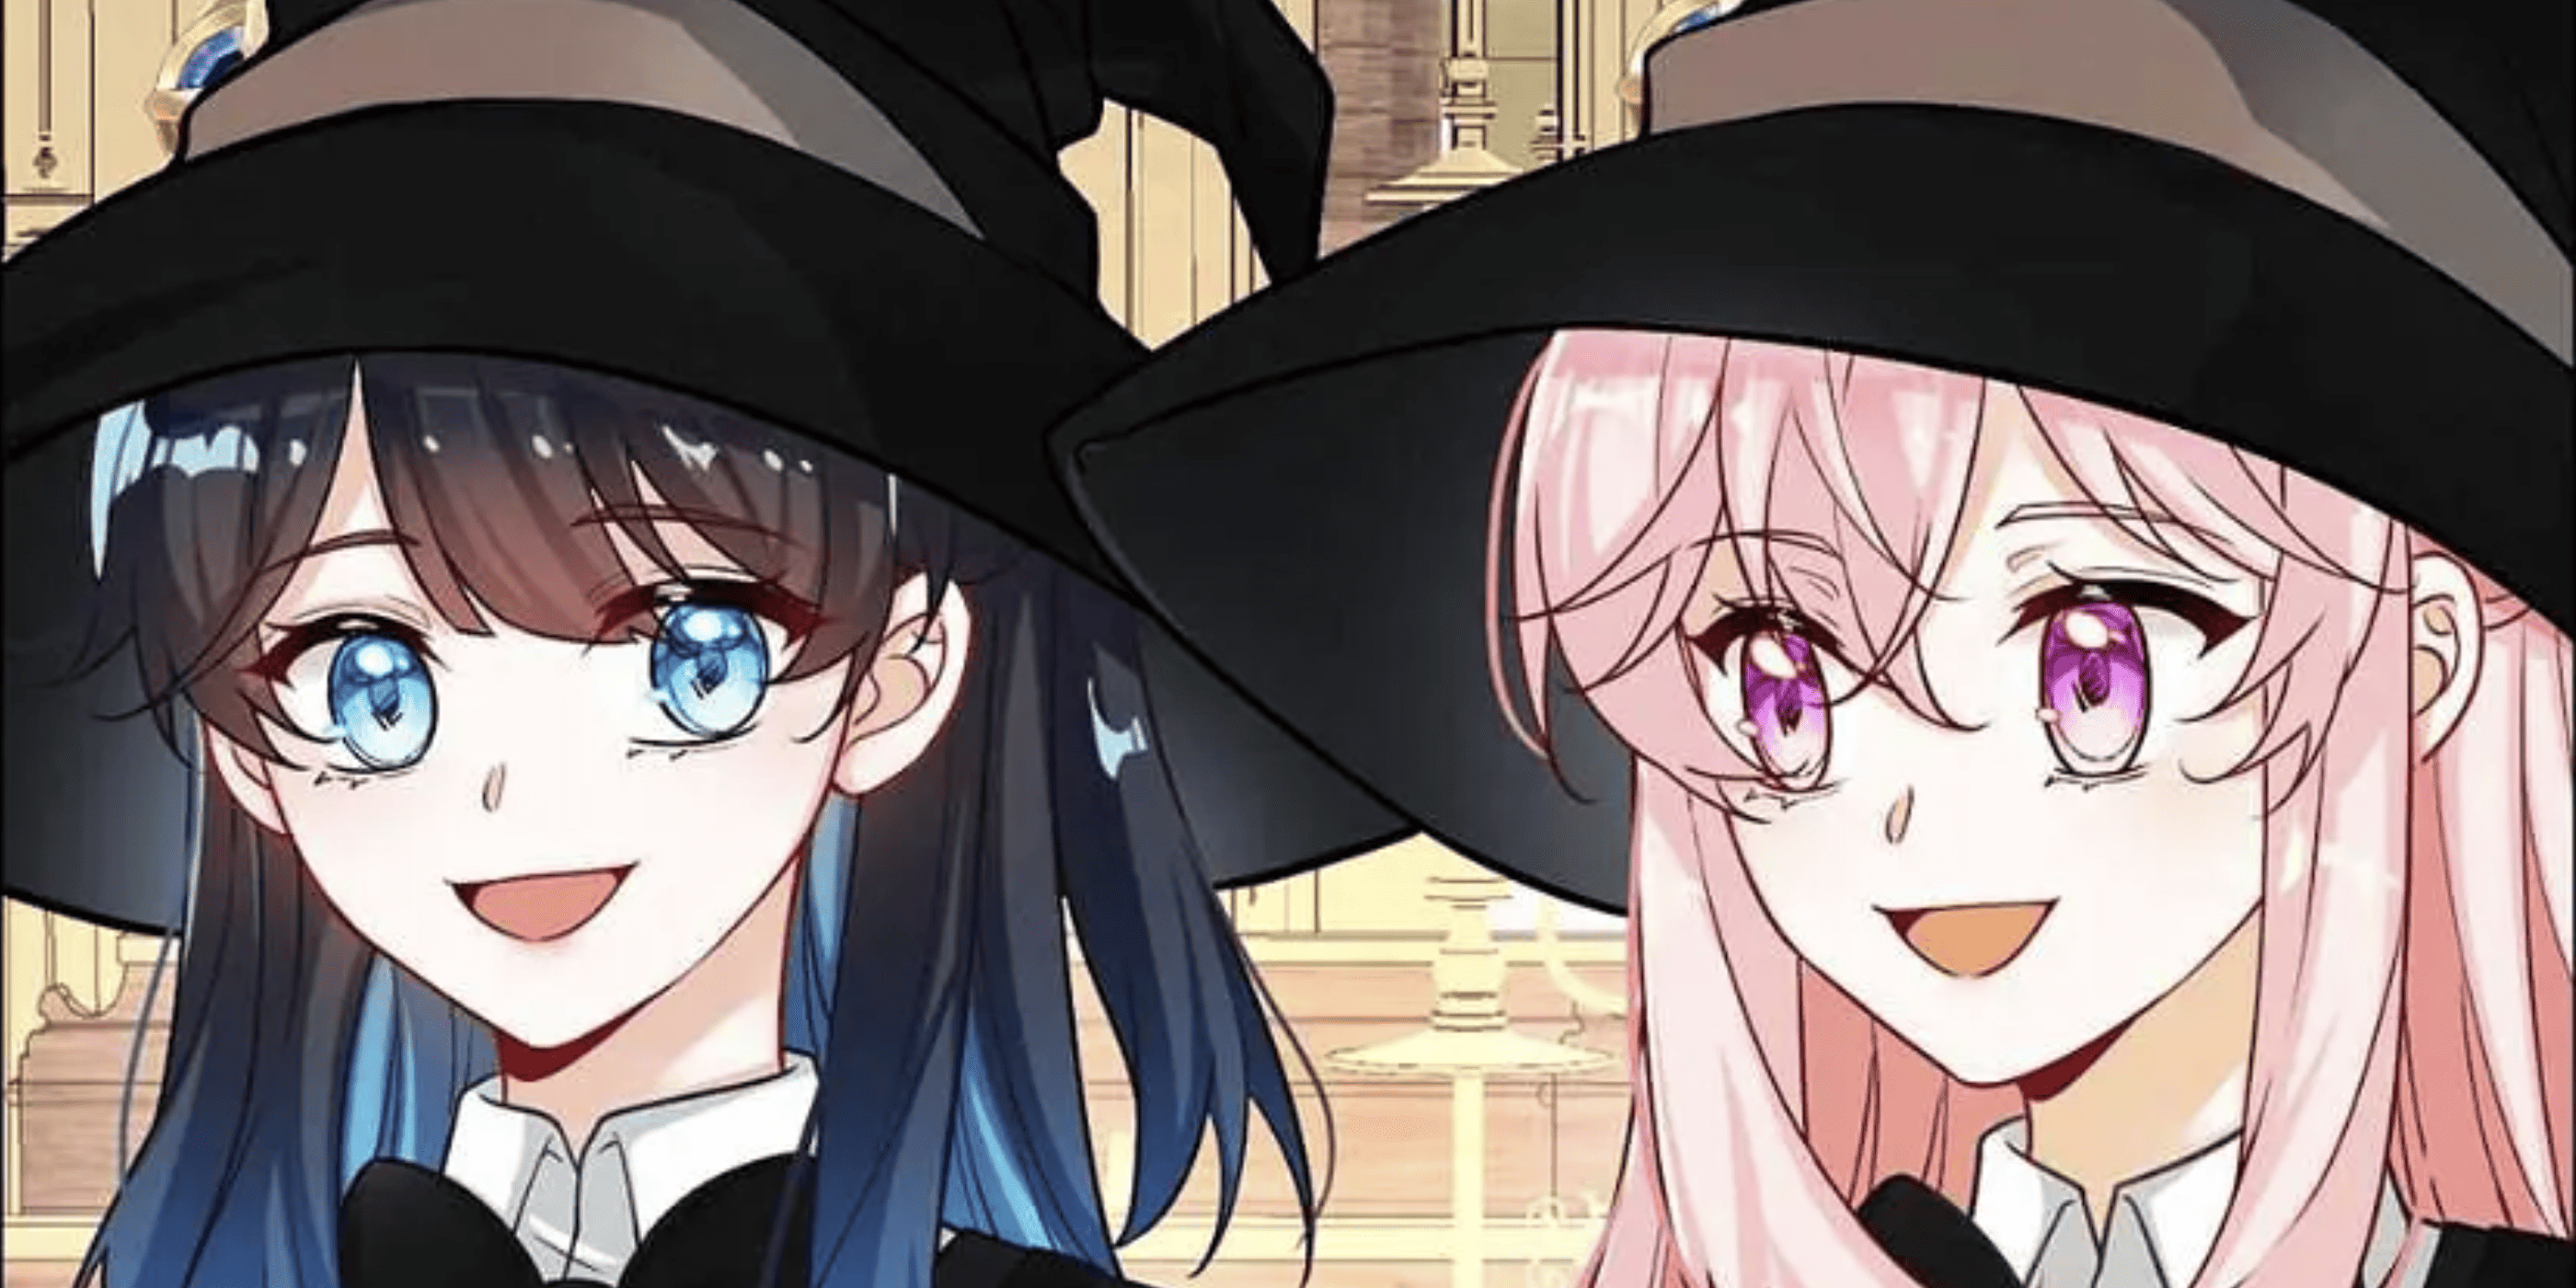 The Daughter of Evil and Miss Devil Chapter 9 release date